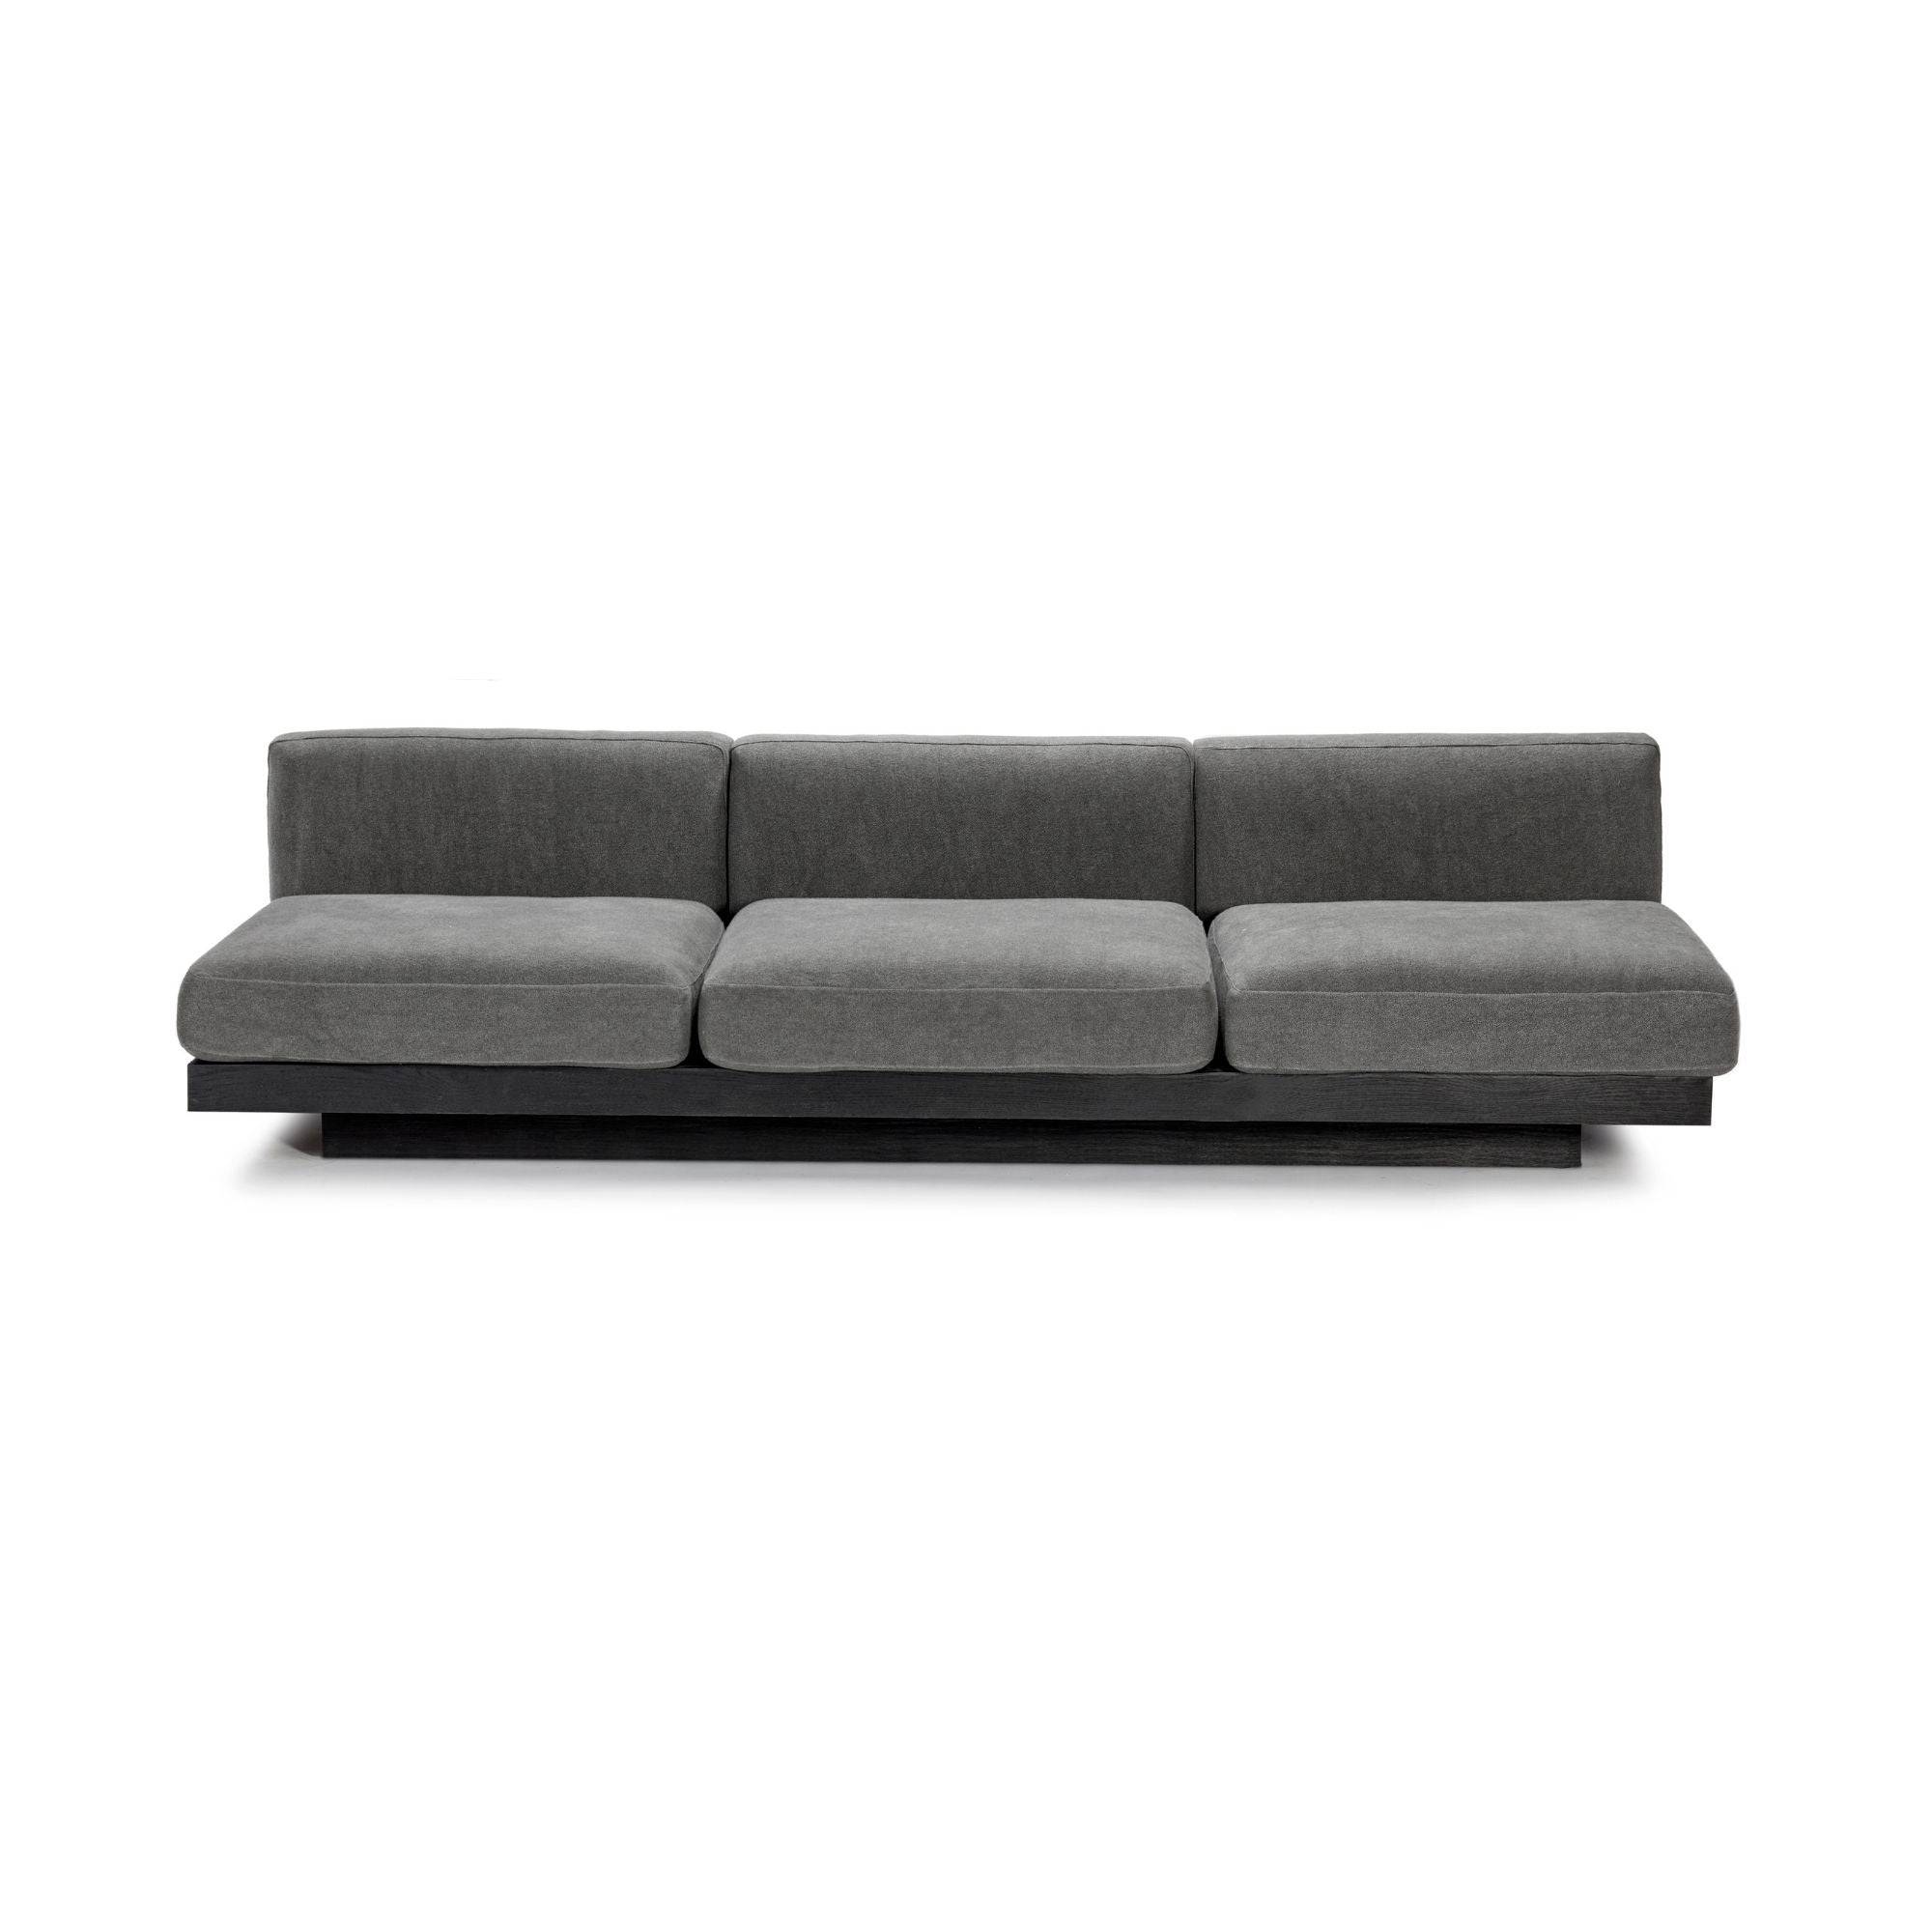 Rudolph 3-seater Sofa - THAT COOL LIVING